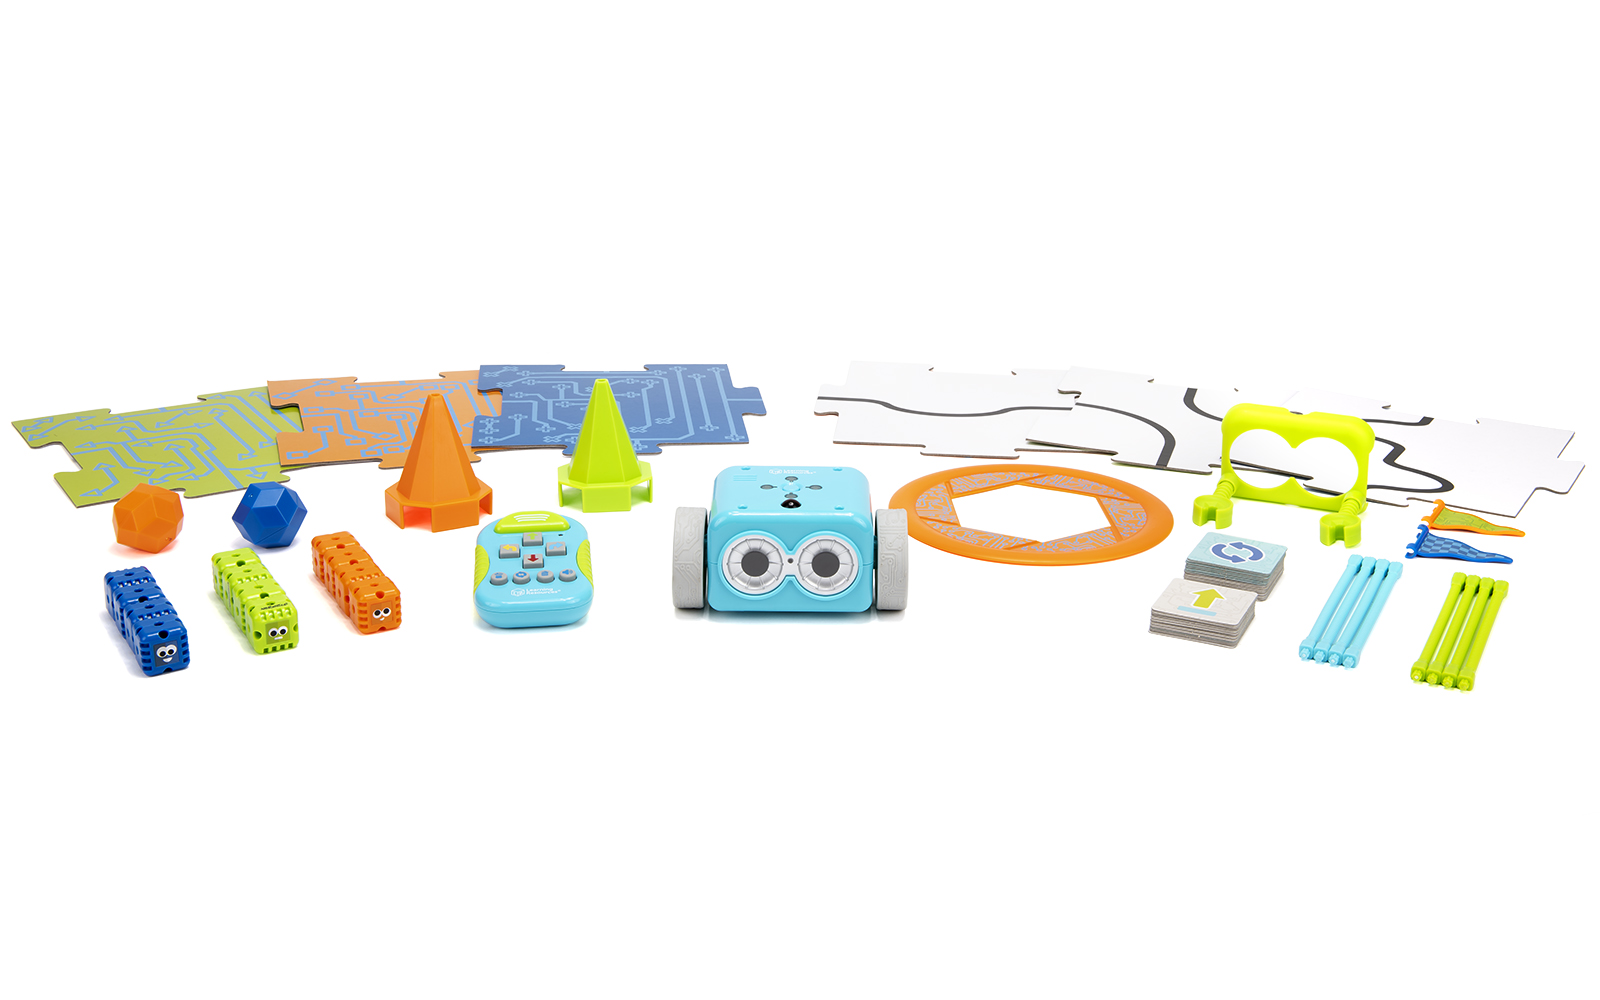 Botley the coding robot STEM Kit contents